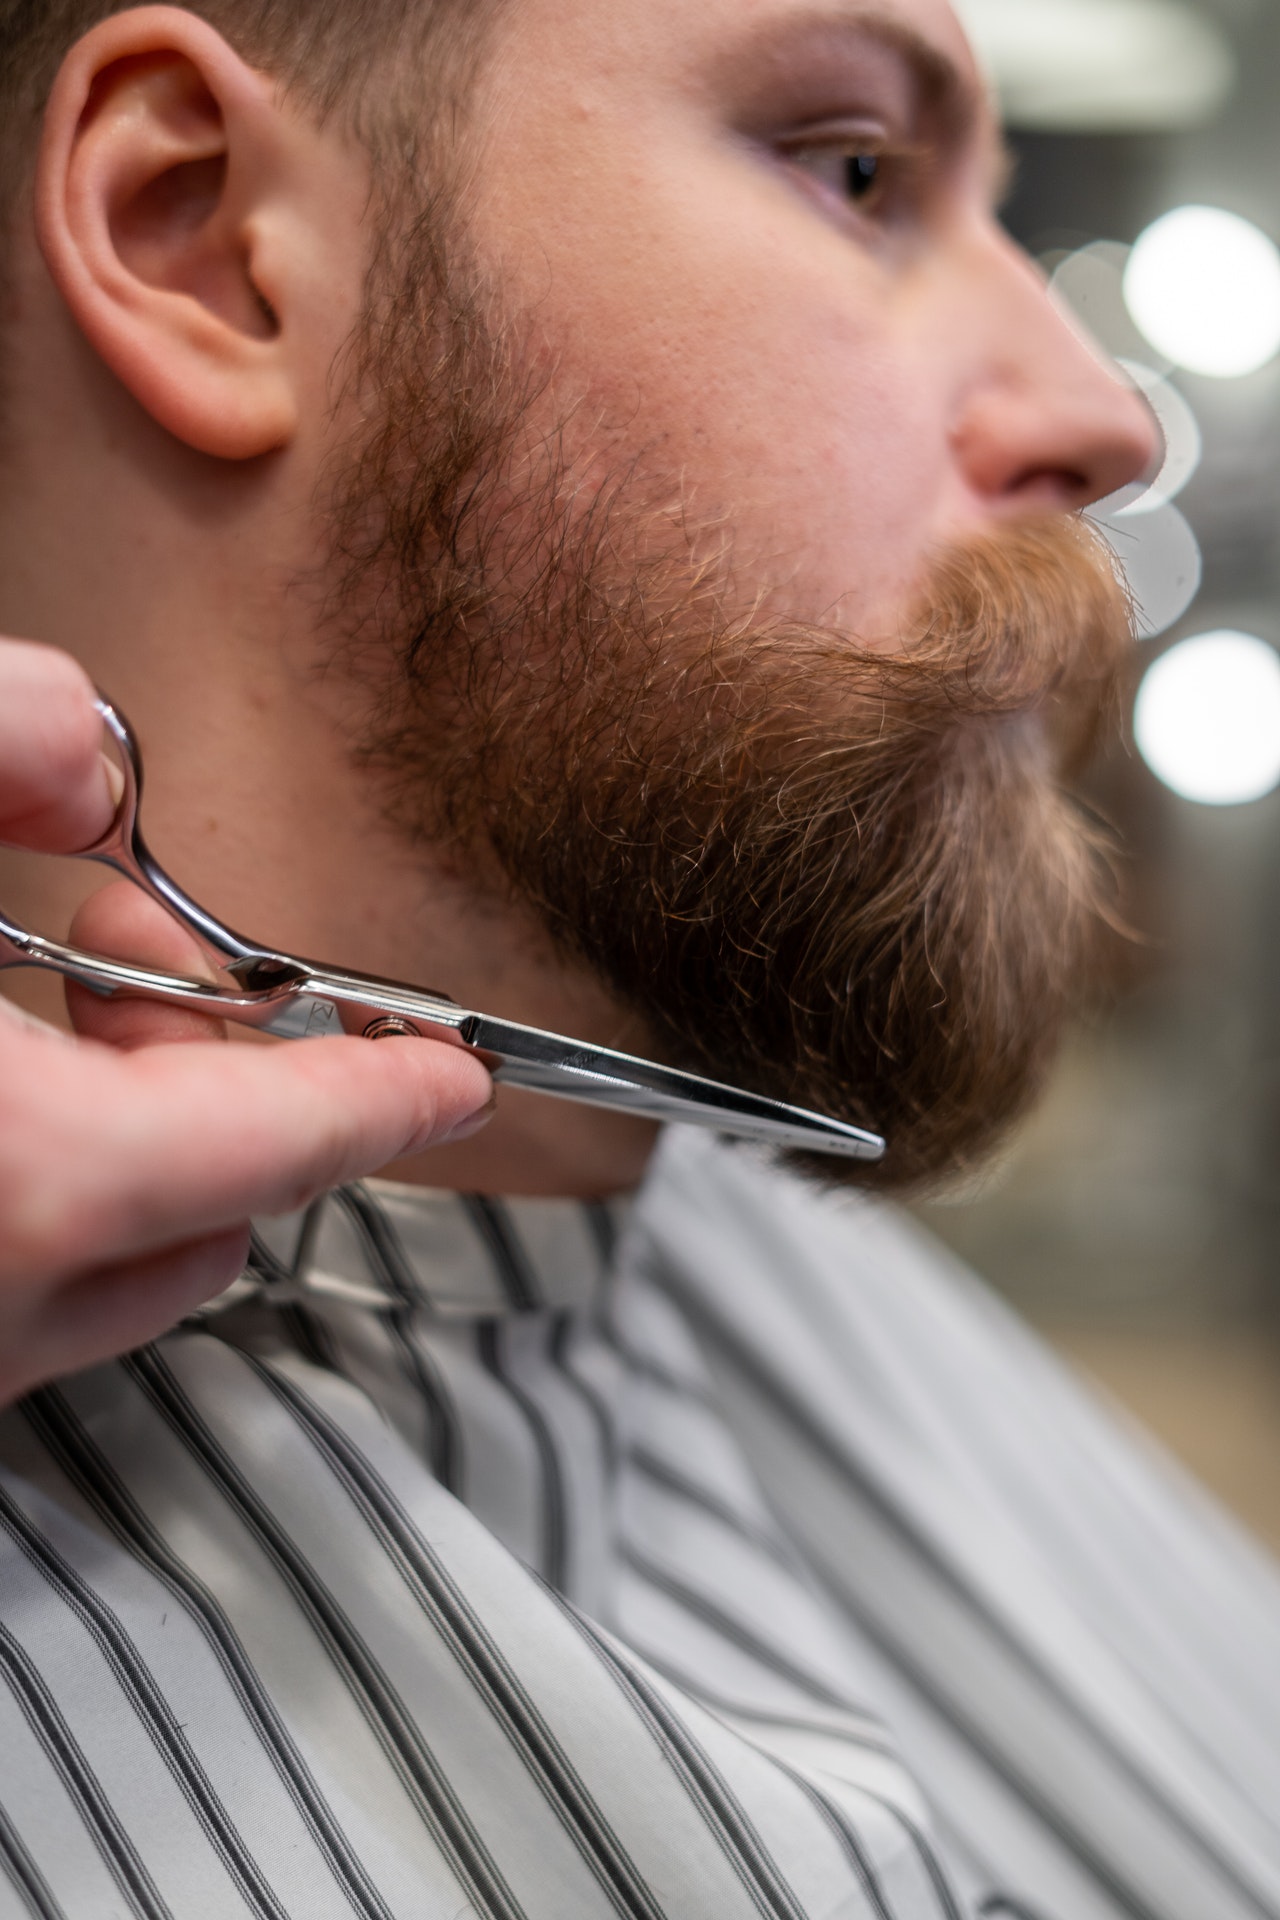 Man Having his Beard Trimmed with Scissors